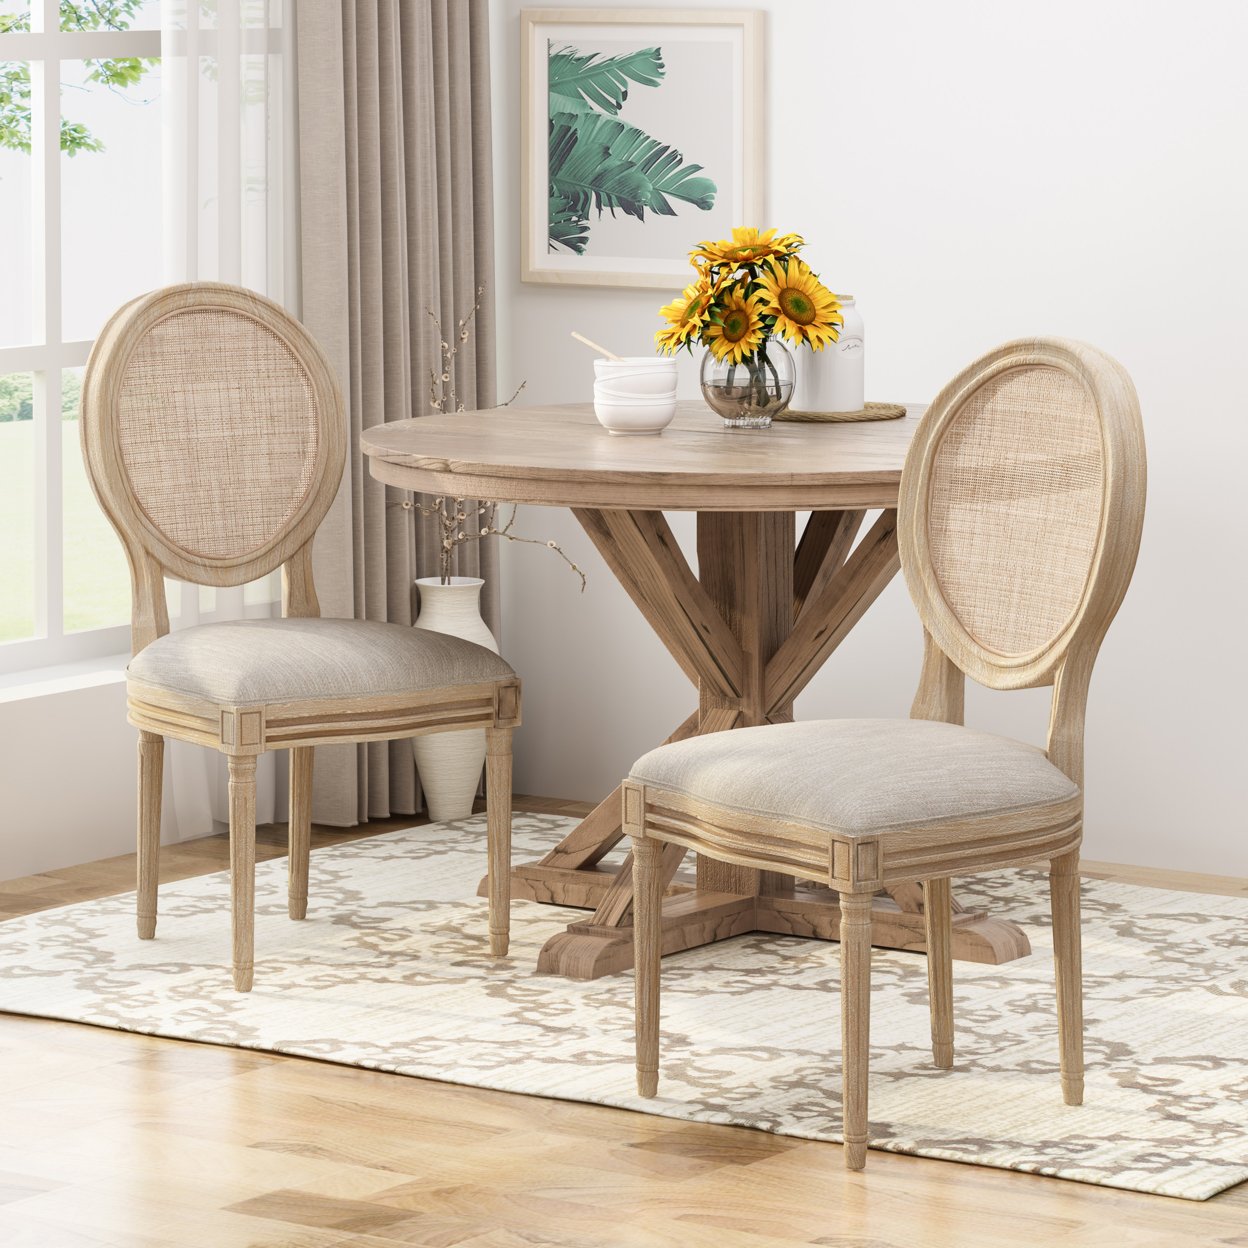 Camilo Wooden Dining Chair With Wicker And Fabric Seating (Set Of 2) - Beige + Natural